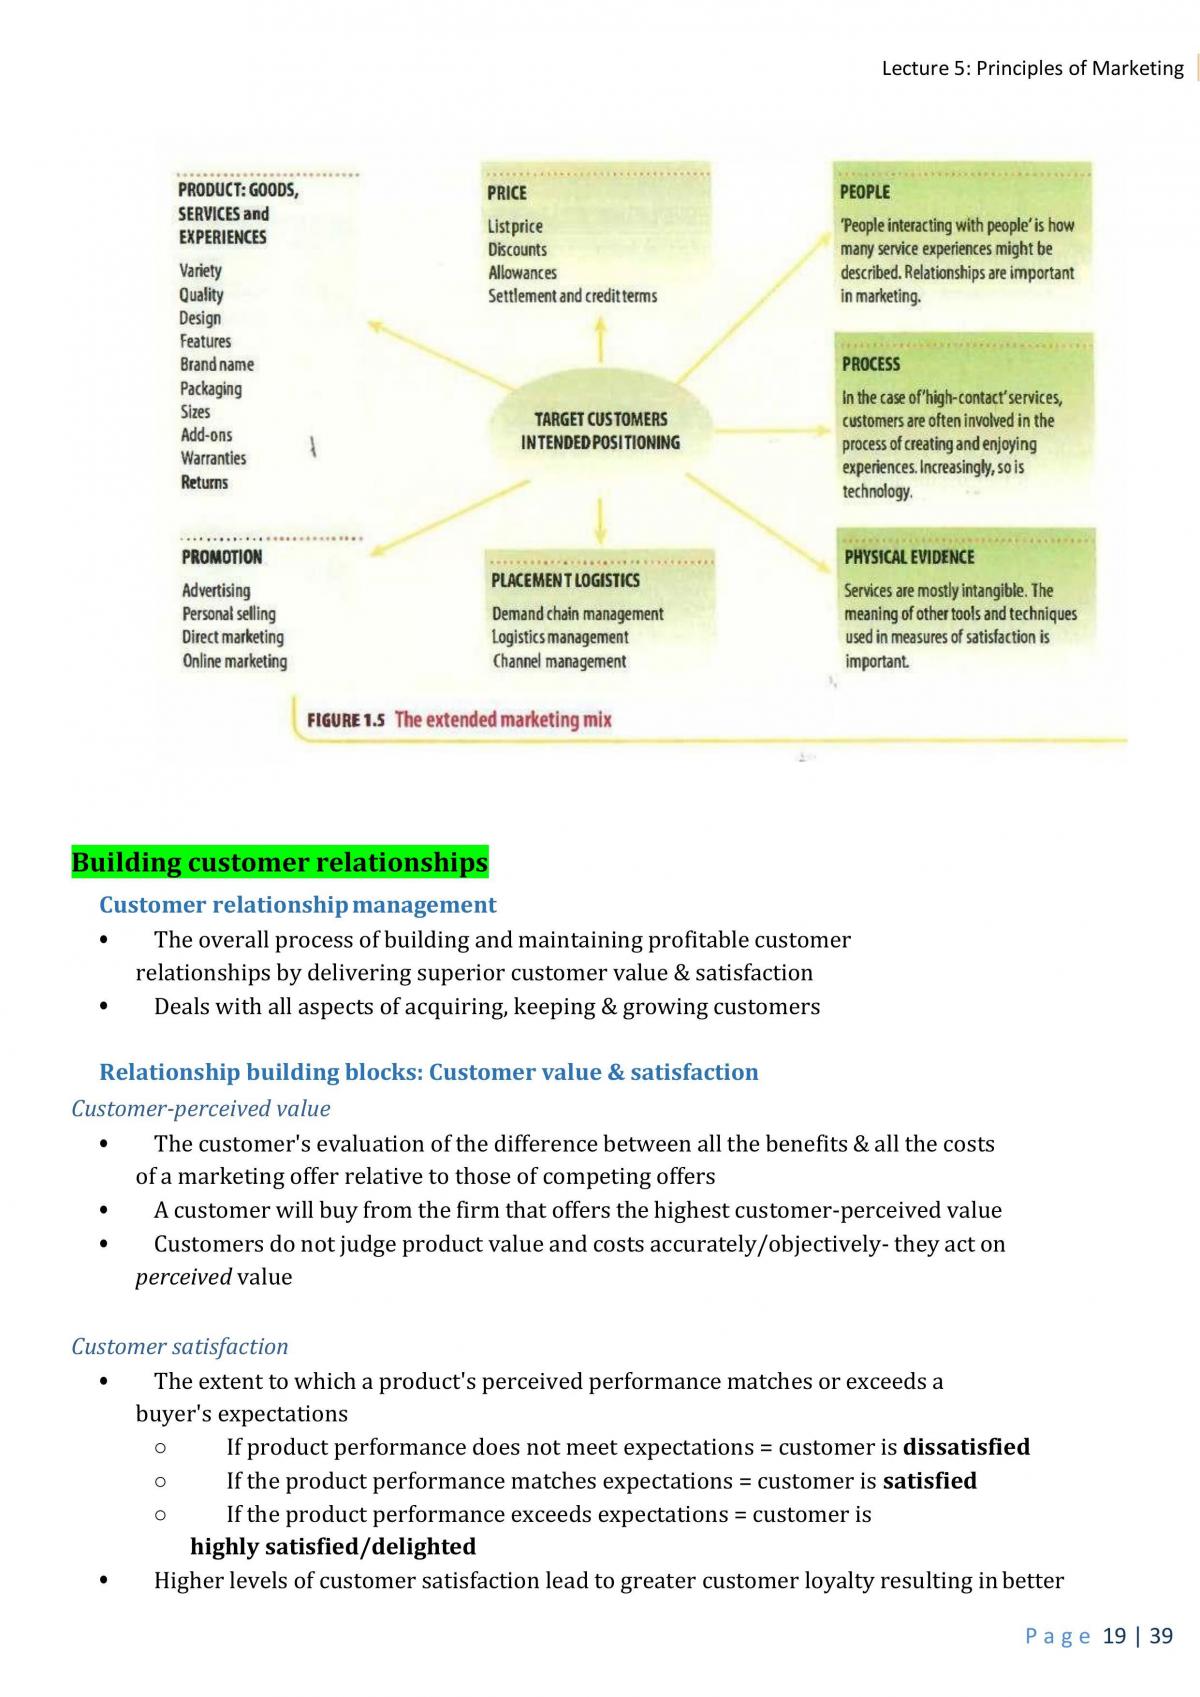 Business and Enterprise 2 Full Modules Notes - Page 19